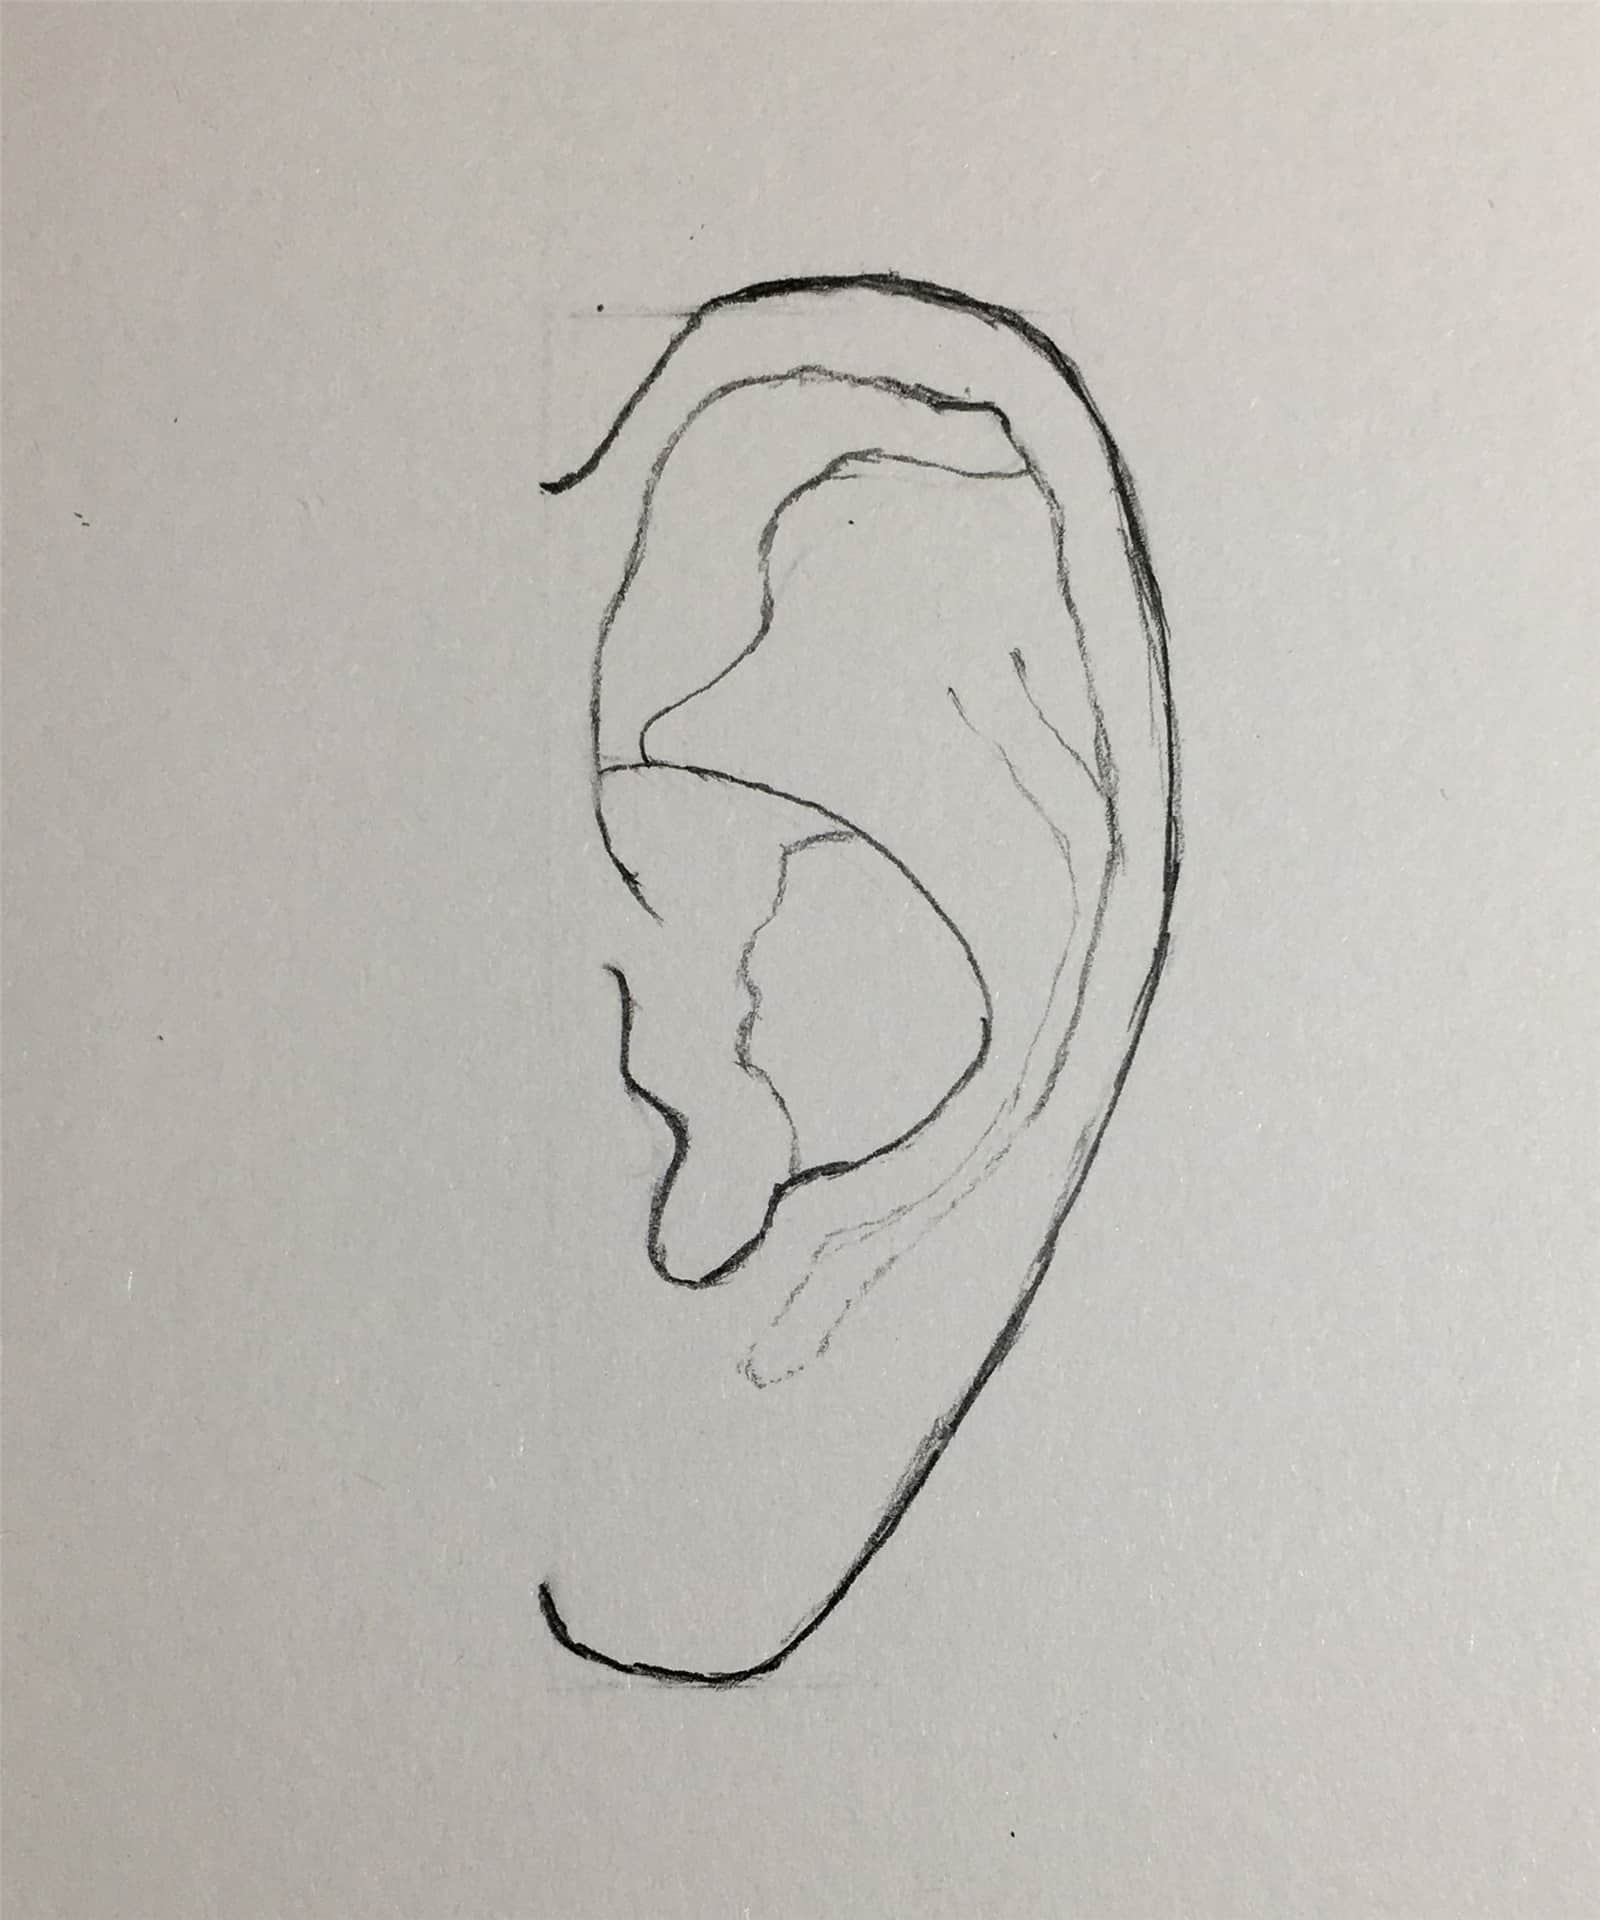 How to Easy Draw an Ear-Step by Step Tutorial